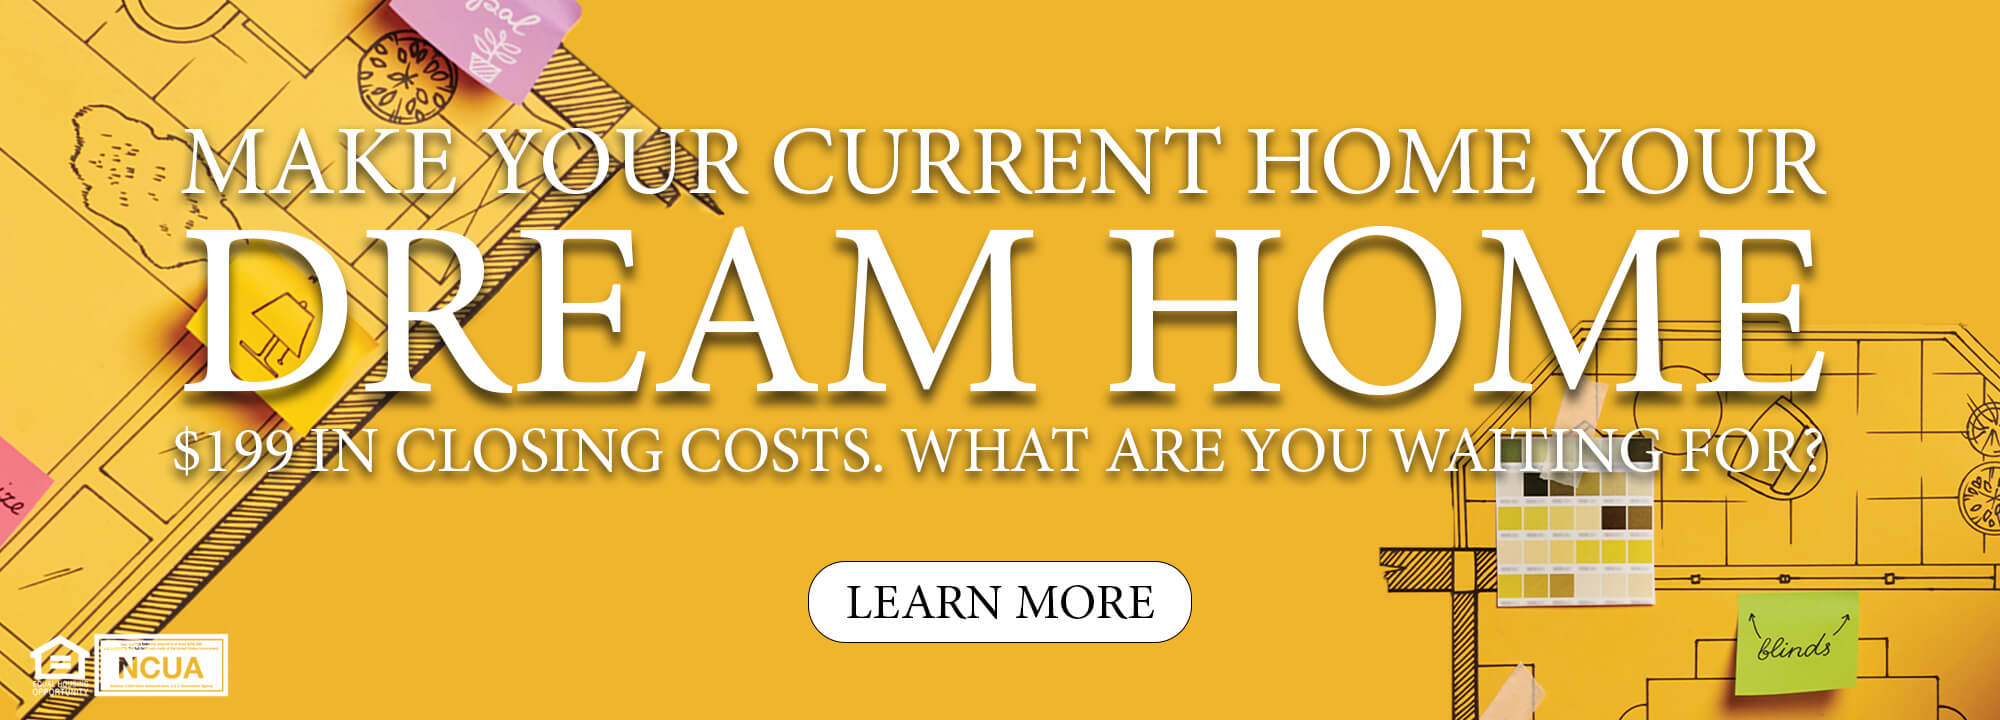 Make your current home your dream home. $199 closing costs. What are you waiting for? Learn more